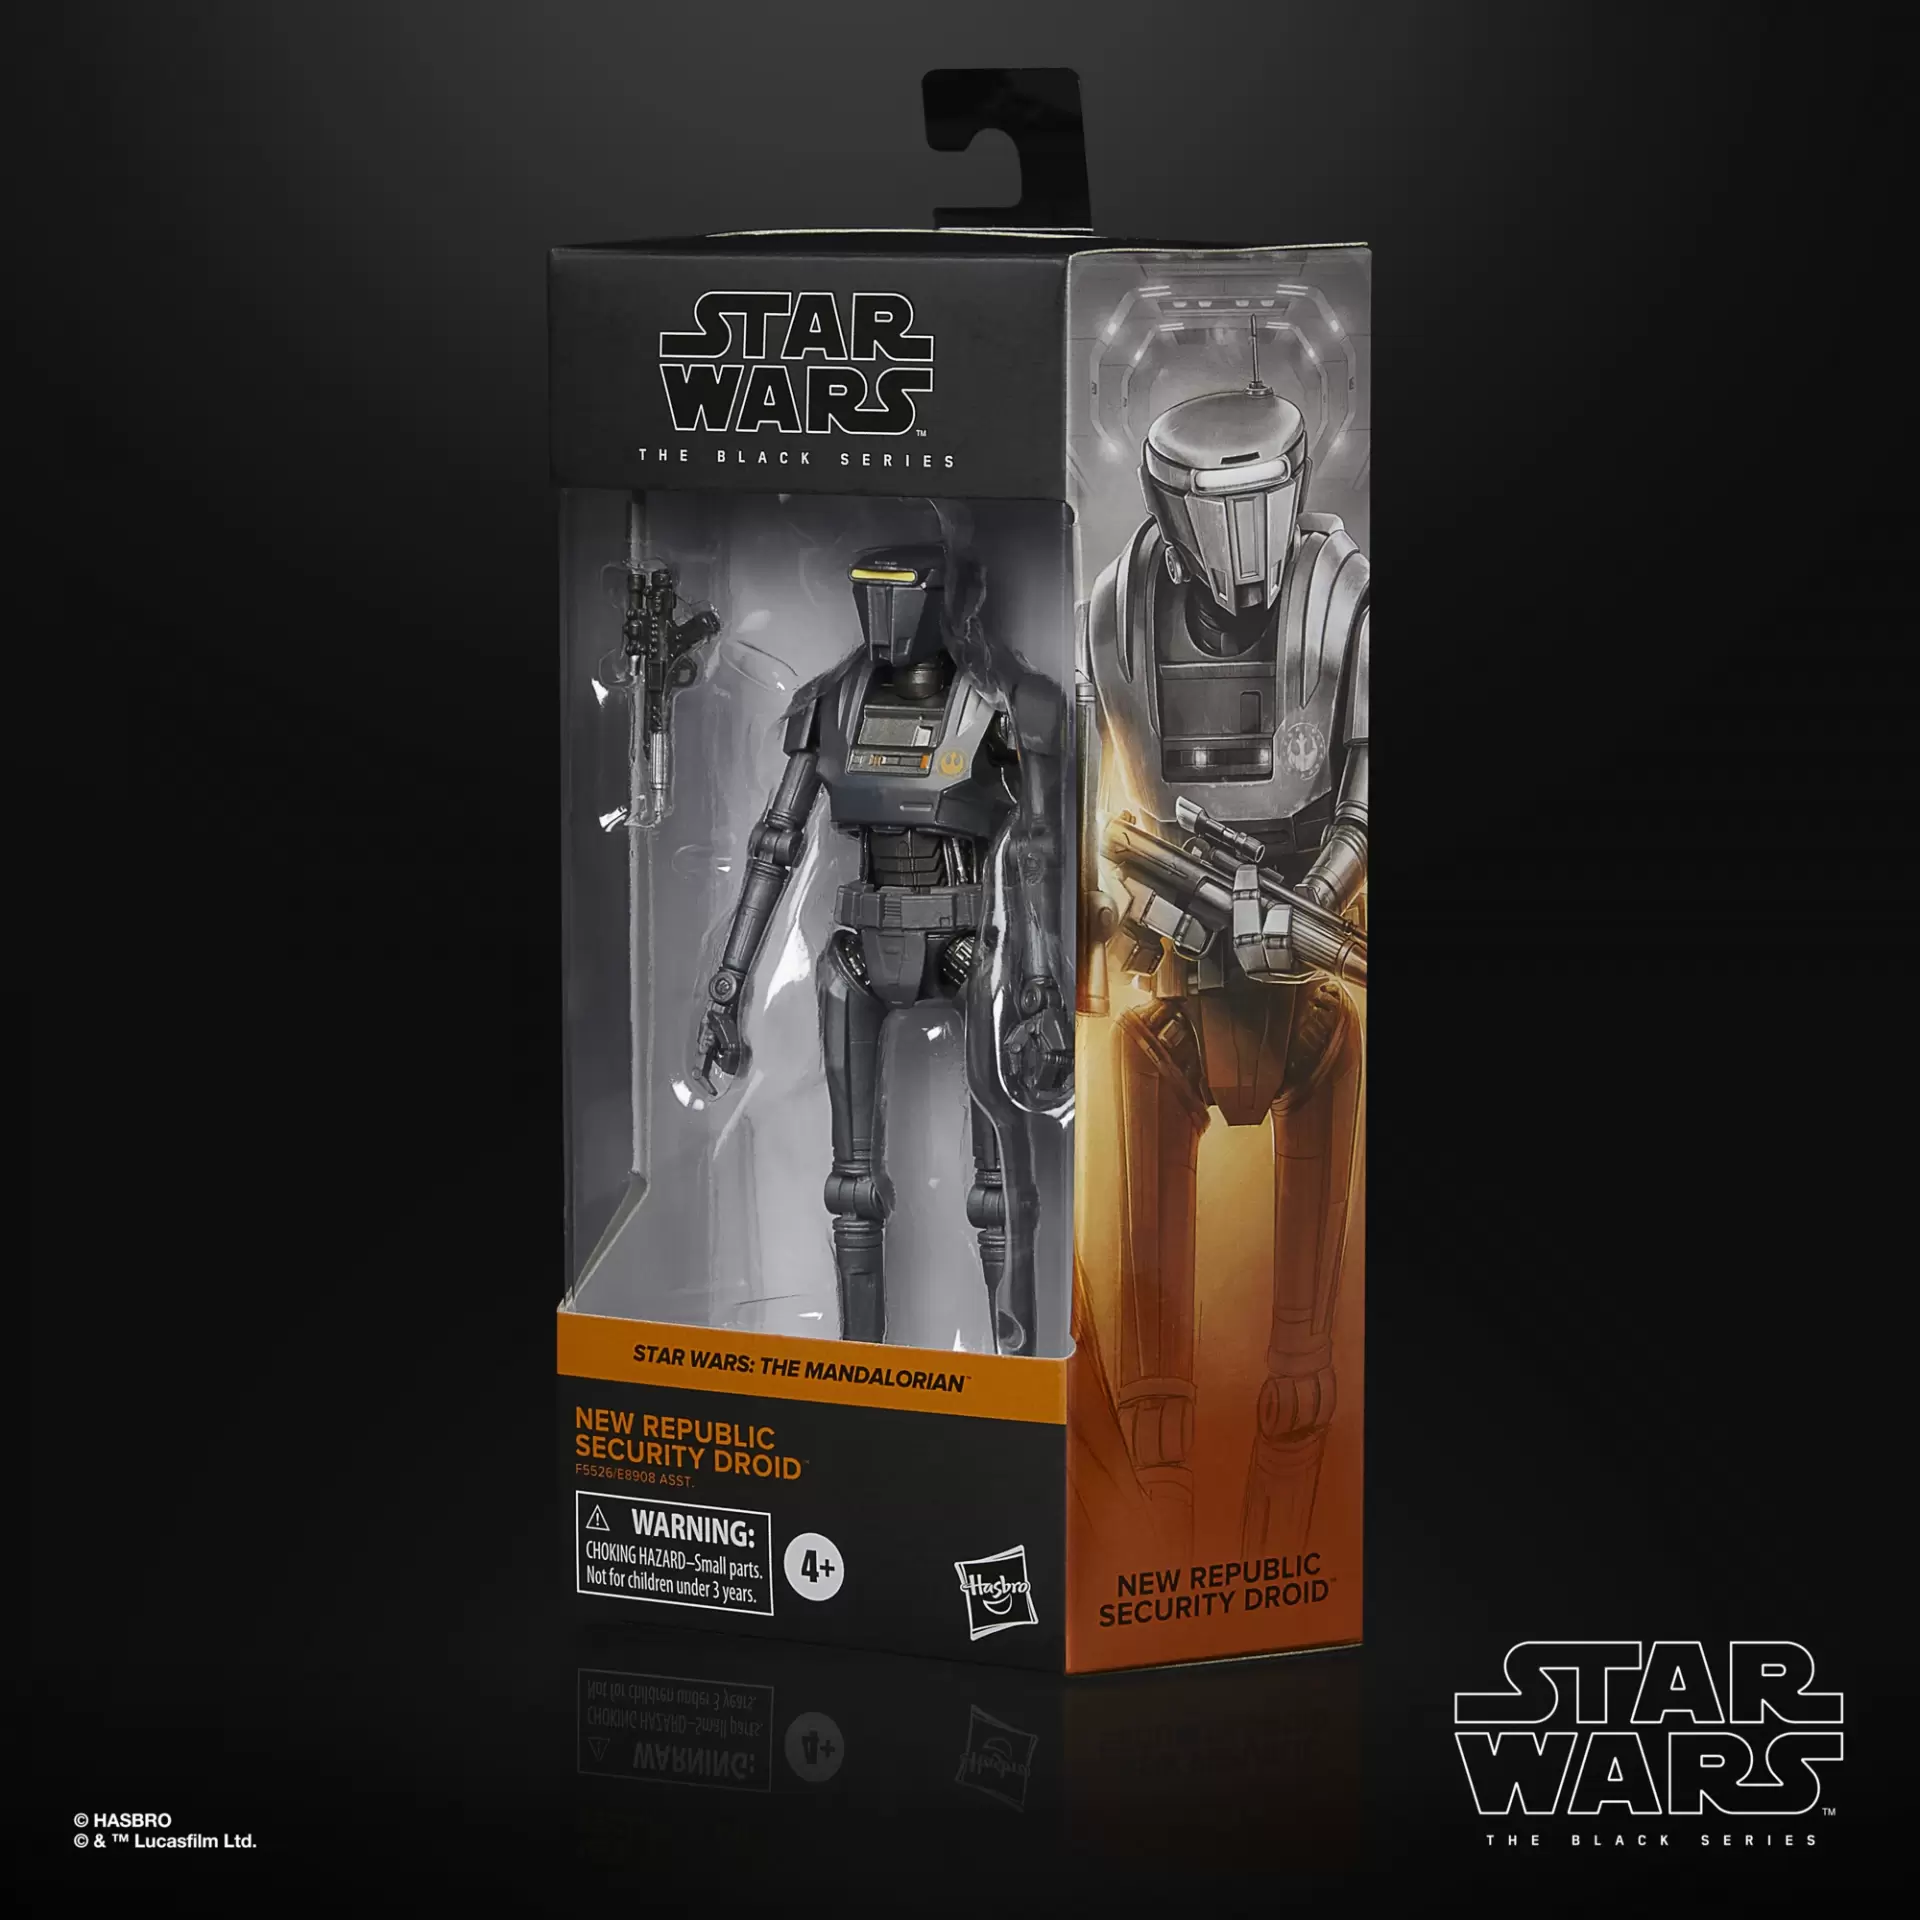 Star wars the black series new republic security droid jawascave 3